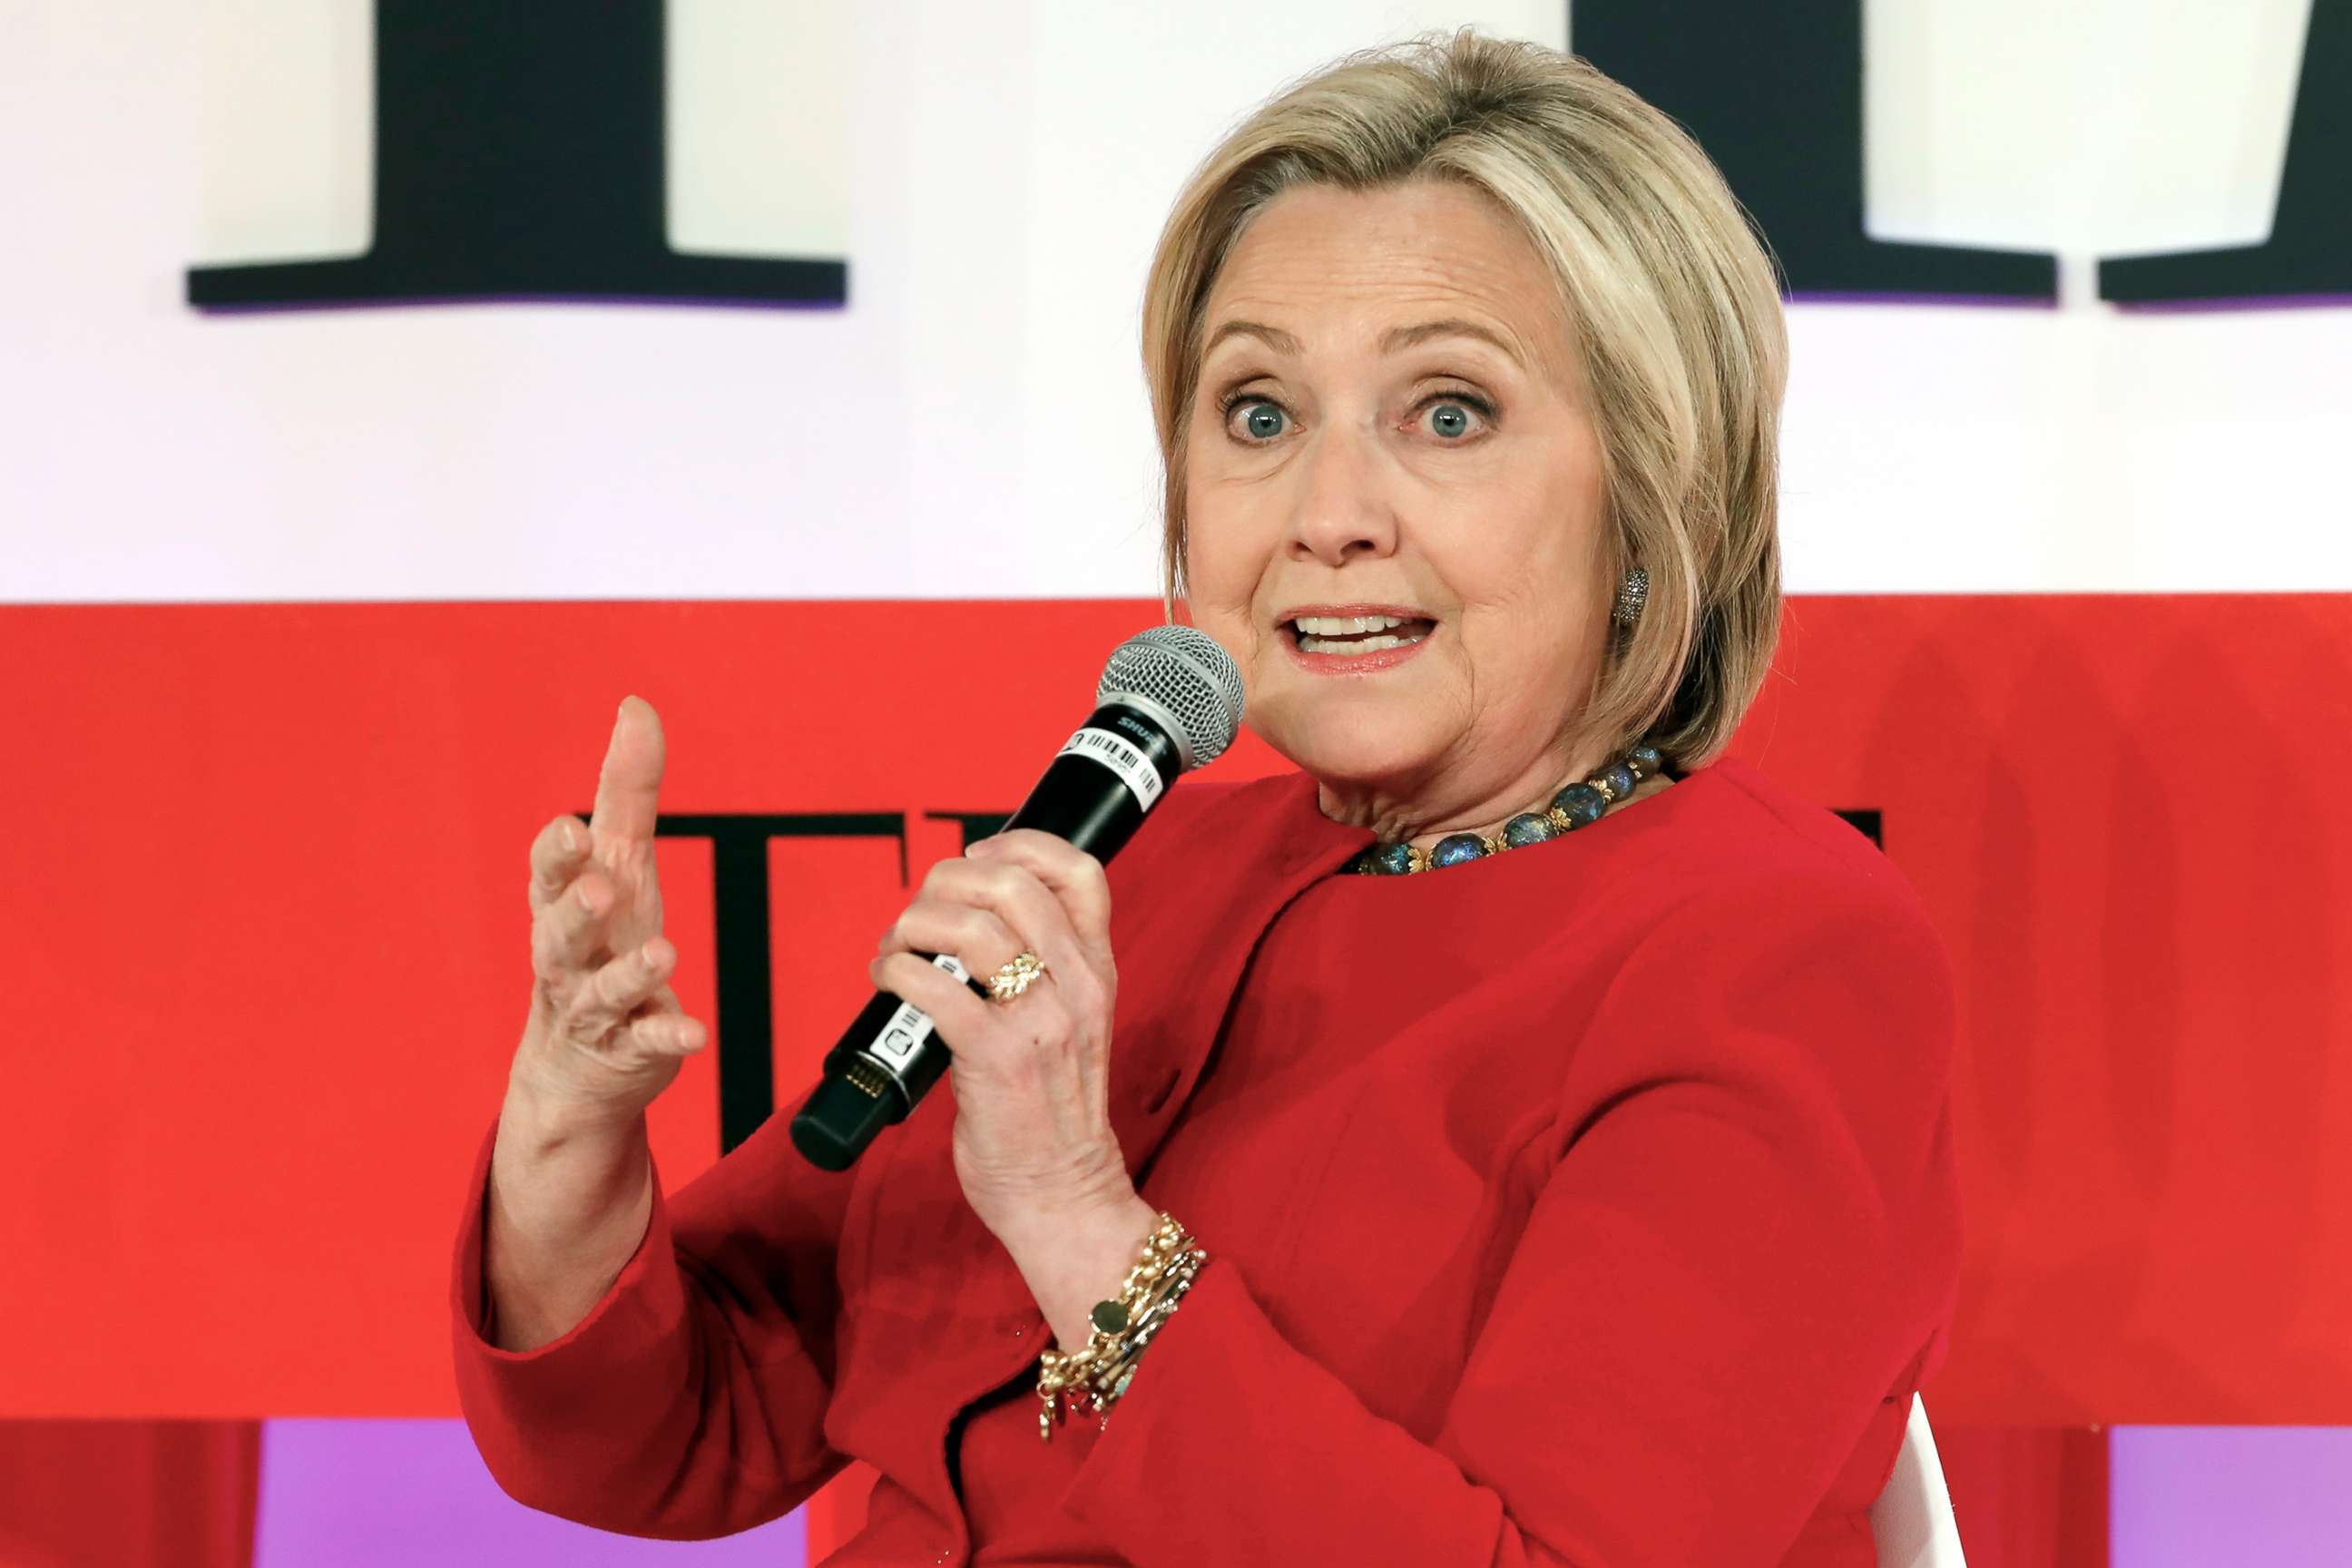 PHOTO: Hillary Clinton speaks during the TIME 100 Summit, in N.Y., April 23, 2019.